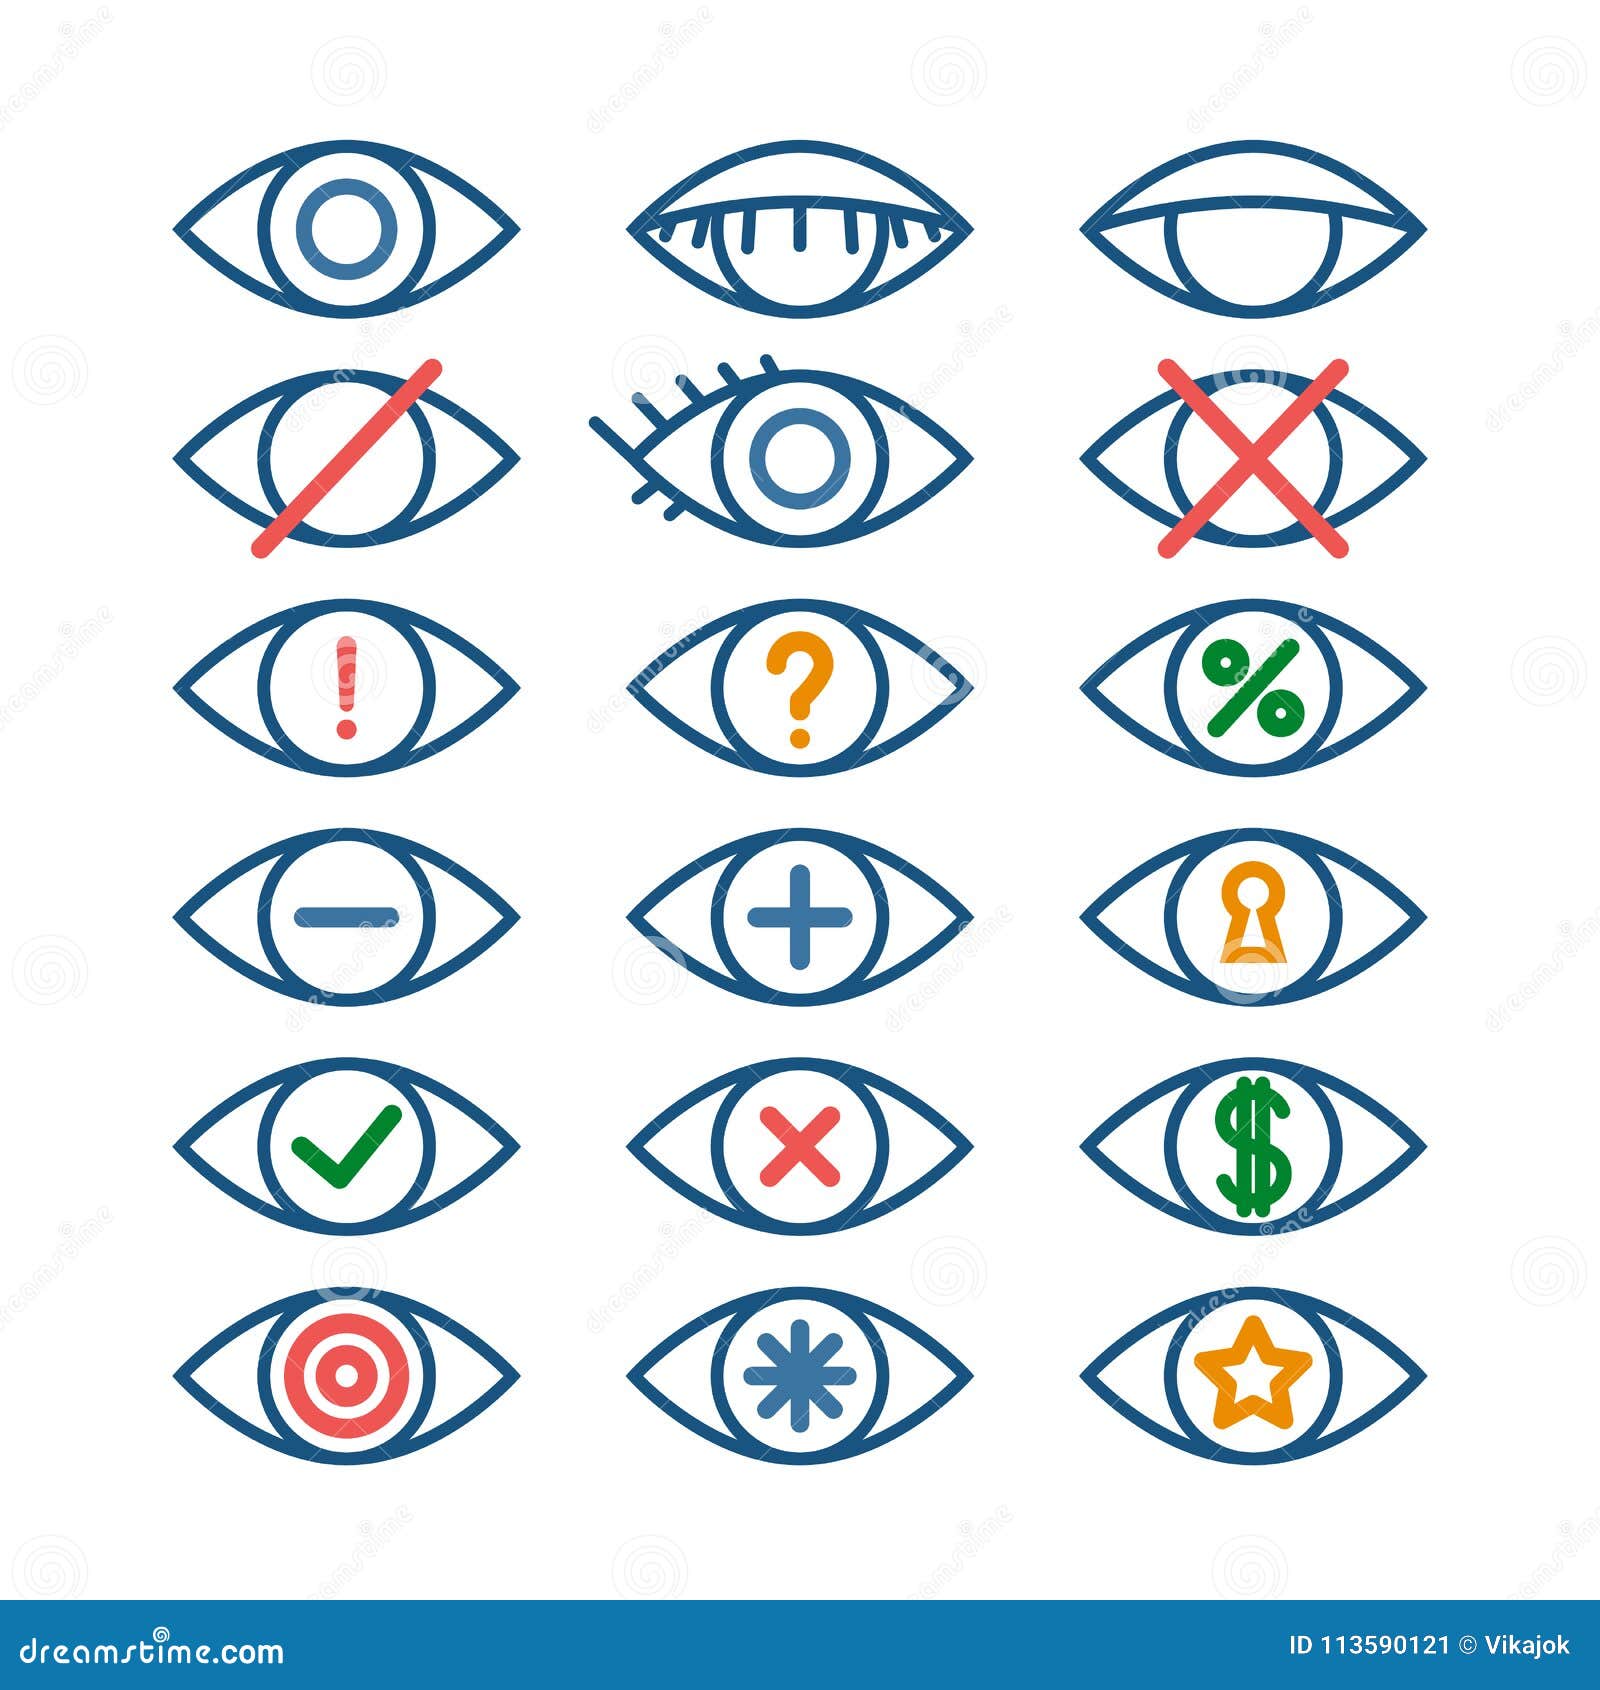 Colored Eye Icons for Different Actions, Set of Outline Eye Pictograms ...